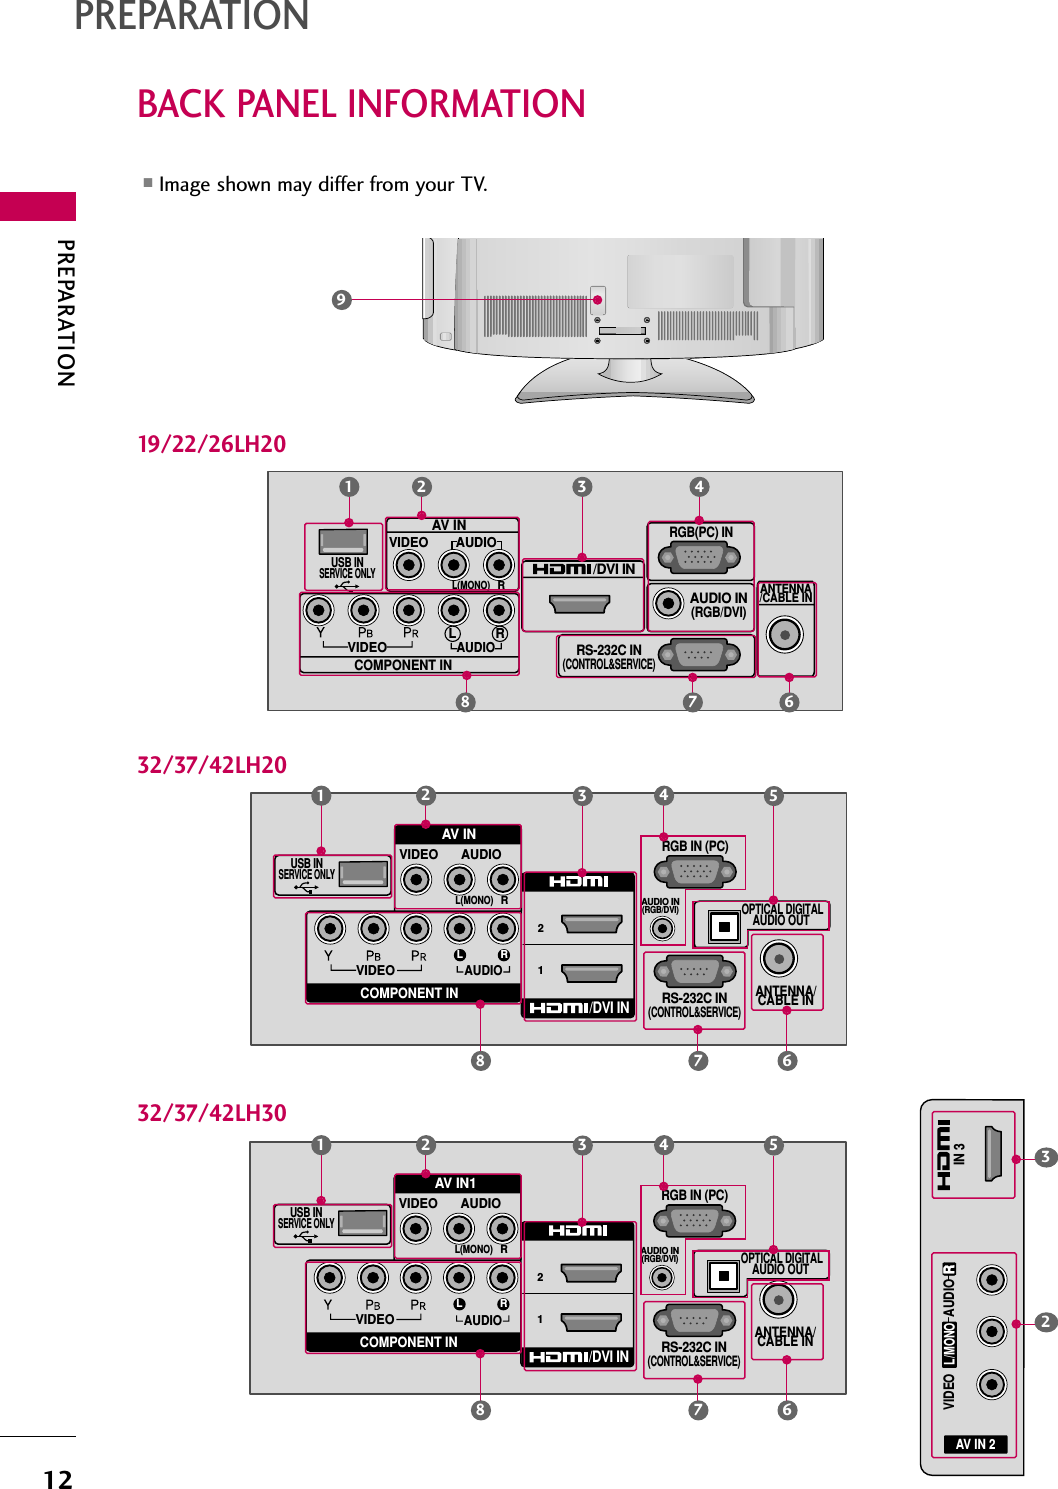 PREPARATION12BACK PANEL INFORMATIONPREPARATION■Image shown may differ from your TV.RS-232C IN(CONTROL&amp;SERVICE)AUDIO IN(RGB/DVI)ANTENNA/CABLE INVIDEOAUDIOL RRGB(PC) IN/DVI INAV INVIDEO AUDIOL(MONO)RCOMPONENT INUSB INSERVICE ONLY21 43AV IN 2L/MONORAUDIOVIDEOIN 323USB INSERVICE ONLYRS-232C IN(CONTROL&amp;SERVICE)AUDIO IN(RGB/DVI)ANTENNA/CABLE INVIDEOAUDIORGB IN (PC)VIDEO AUDIOL(MONO)R21L ROPTICAL DIGITALAUDIO OUT /DVI INCOMPONENT INAV IN21332/37/42LH2019/22/26LH20457 6832/37/42LH307 689USB INSERVICE ONLYRS-232C IN(CONTROL&amp;SERVICE)AUDIO IN(RGB/DVI)ANTENNA/CABLE INVIDEOAUDIORGB IN (PC)VIDEO AUDIOL(MONO)R21L ROPTICAL DIGITALAUDIO OUT /DVI INCOMPONENT INAV IN1213457 68